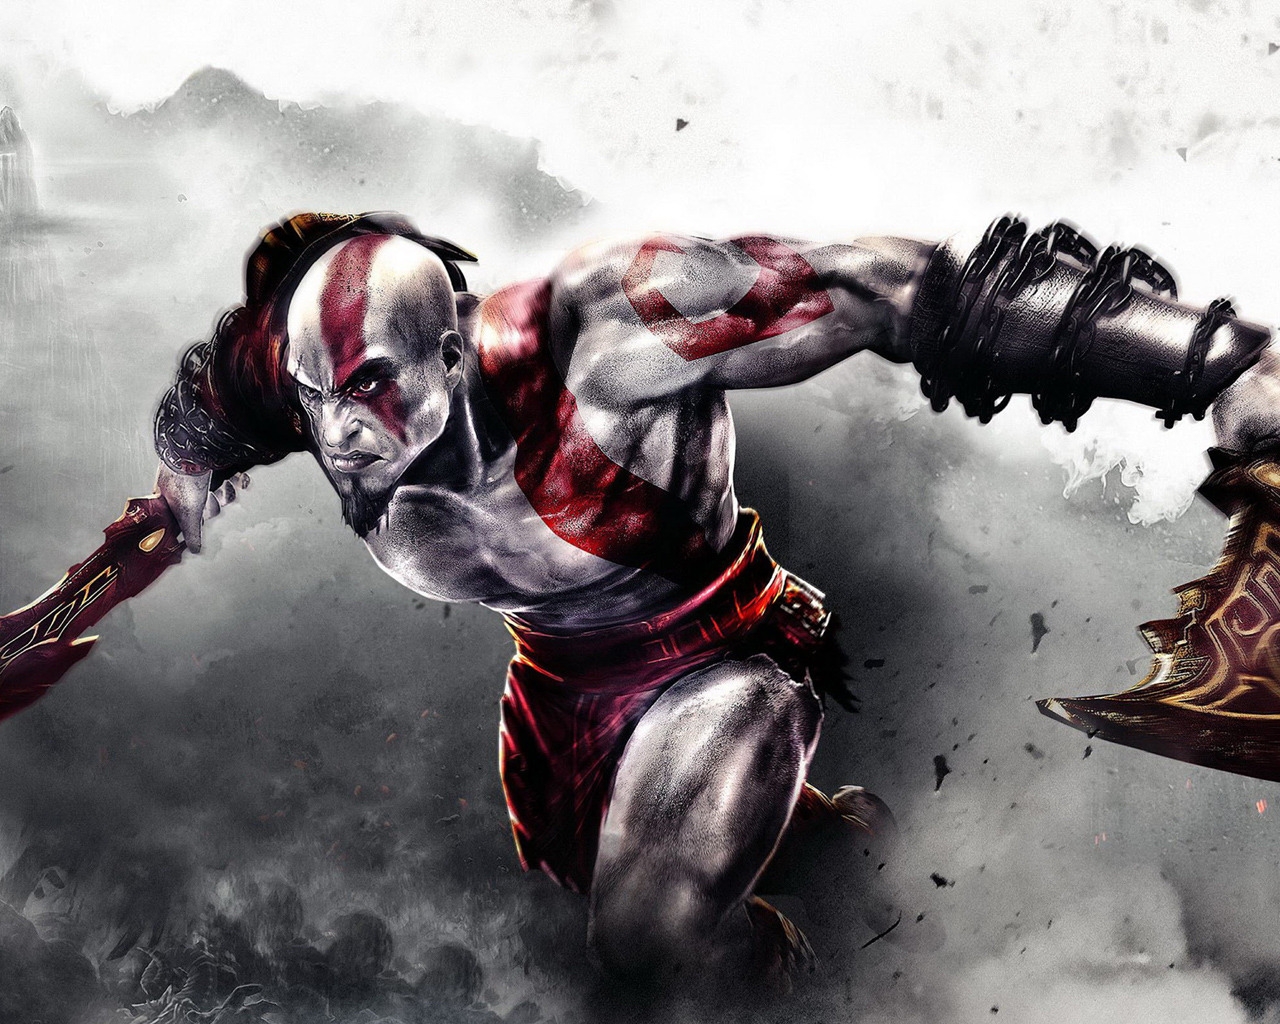 Angry Kratos for 1280 x 1024 resolution